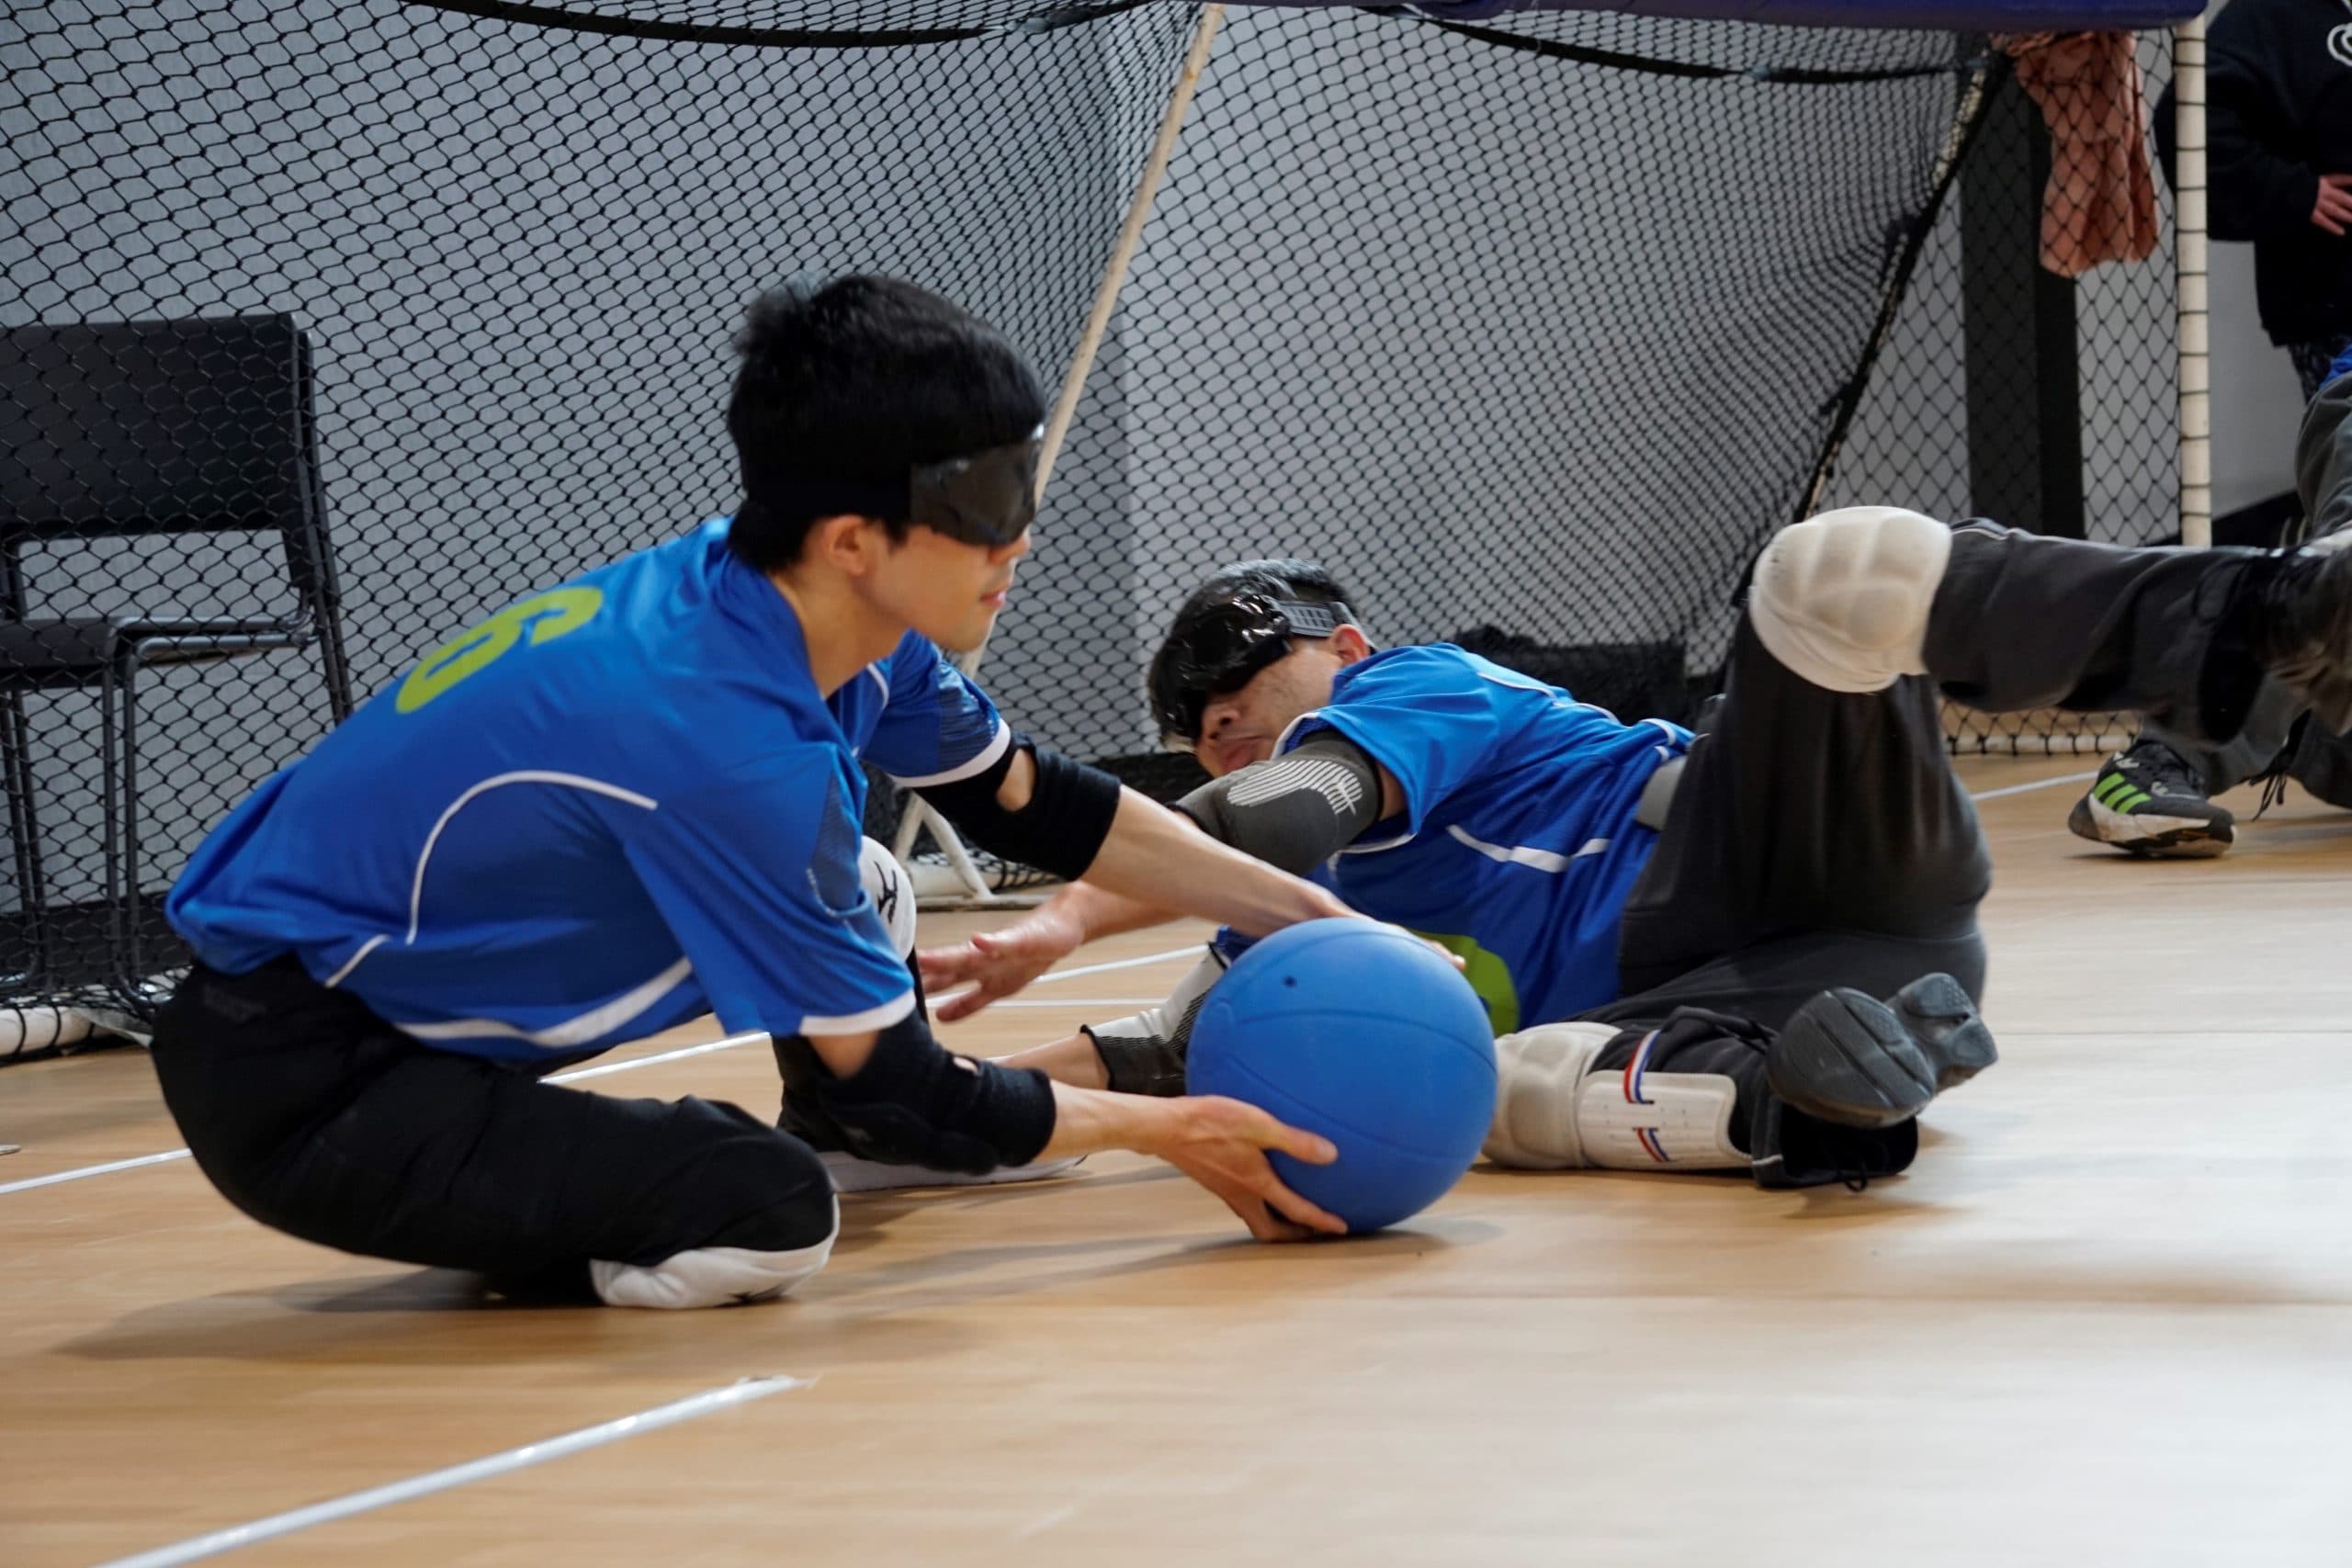 Two athletes with low vision playing goalball.